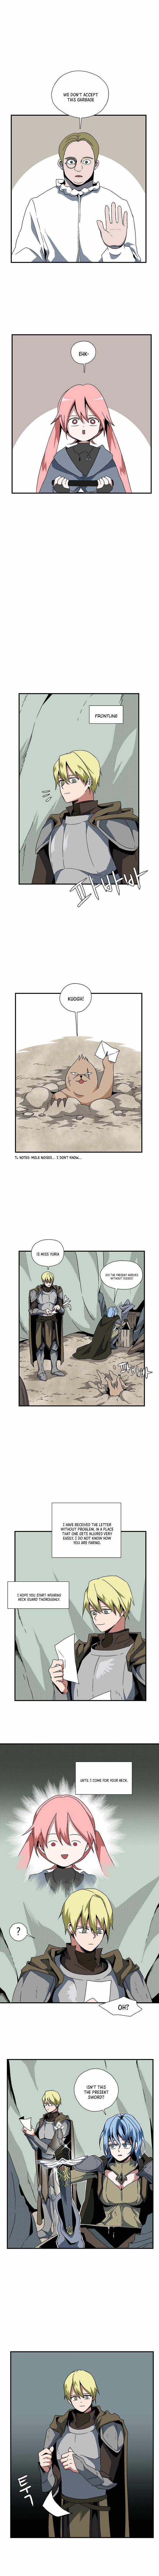 Even The Demon King, One Step At A Time - Page 2